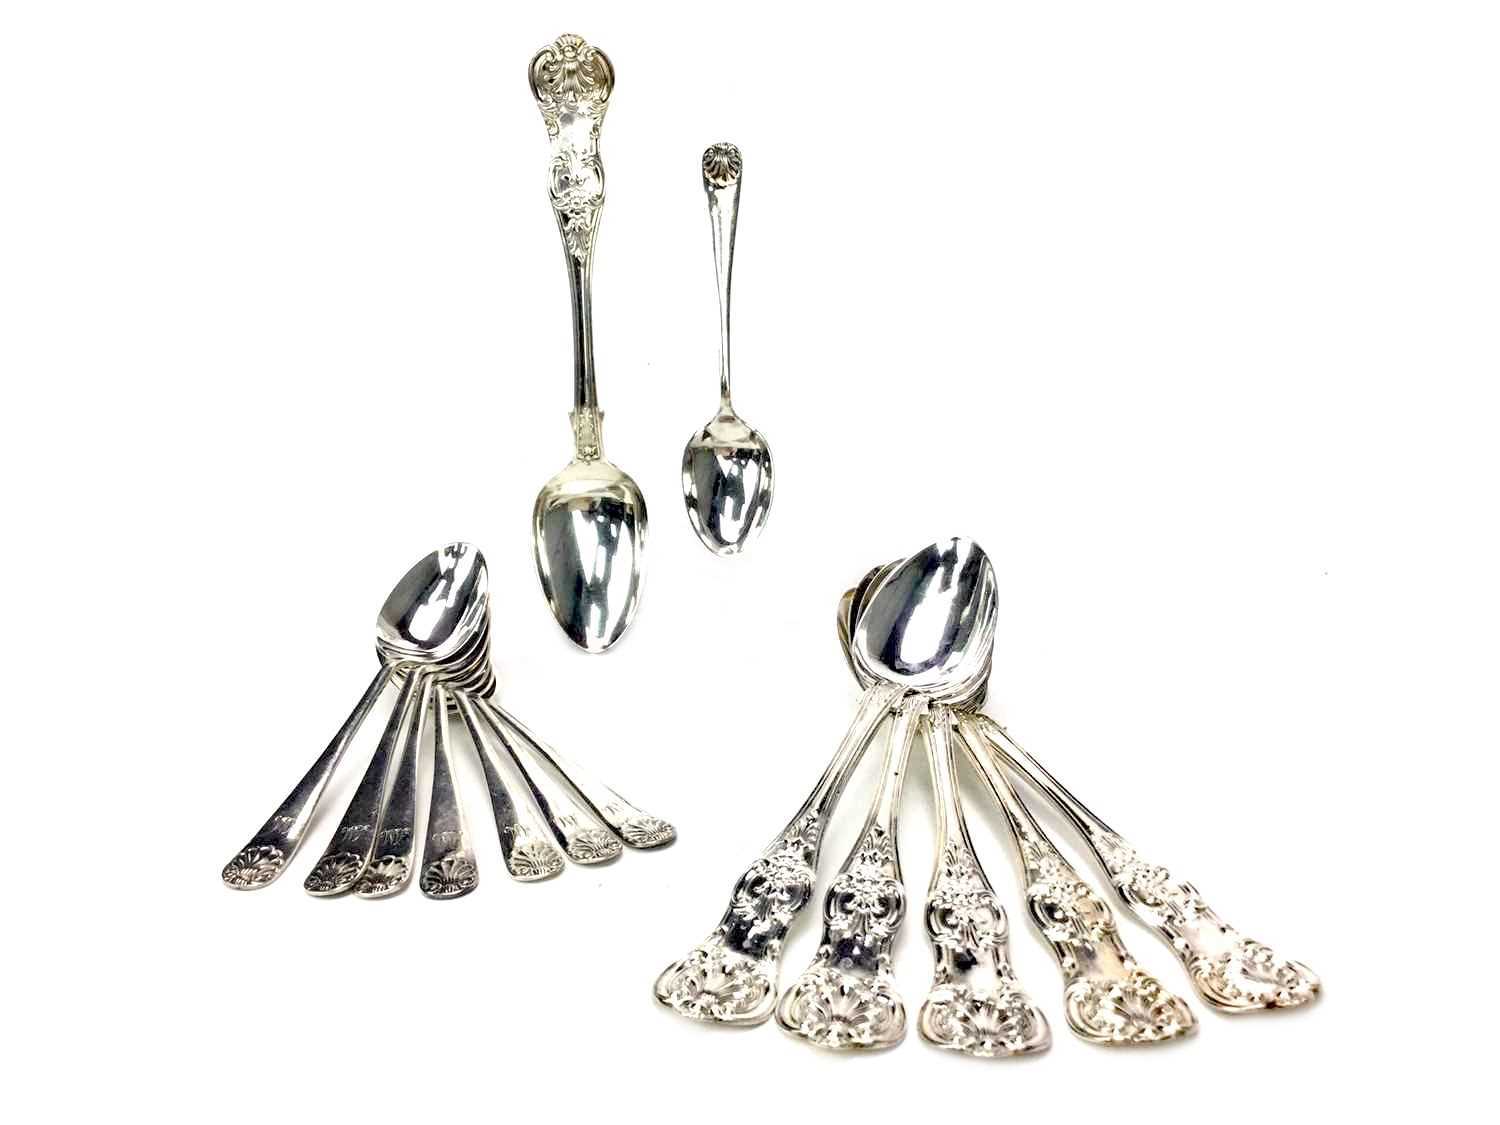 Lot 887 - A SET OF SIX VICTORIAN SILVER TEASPOONS ALONG WITH TWELVE COFFEE SPOONS